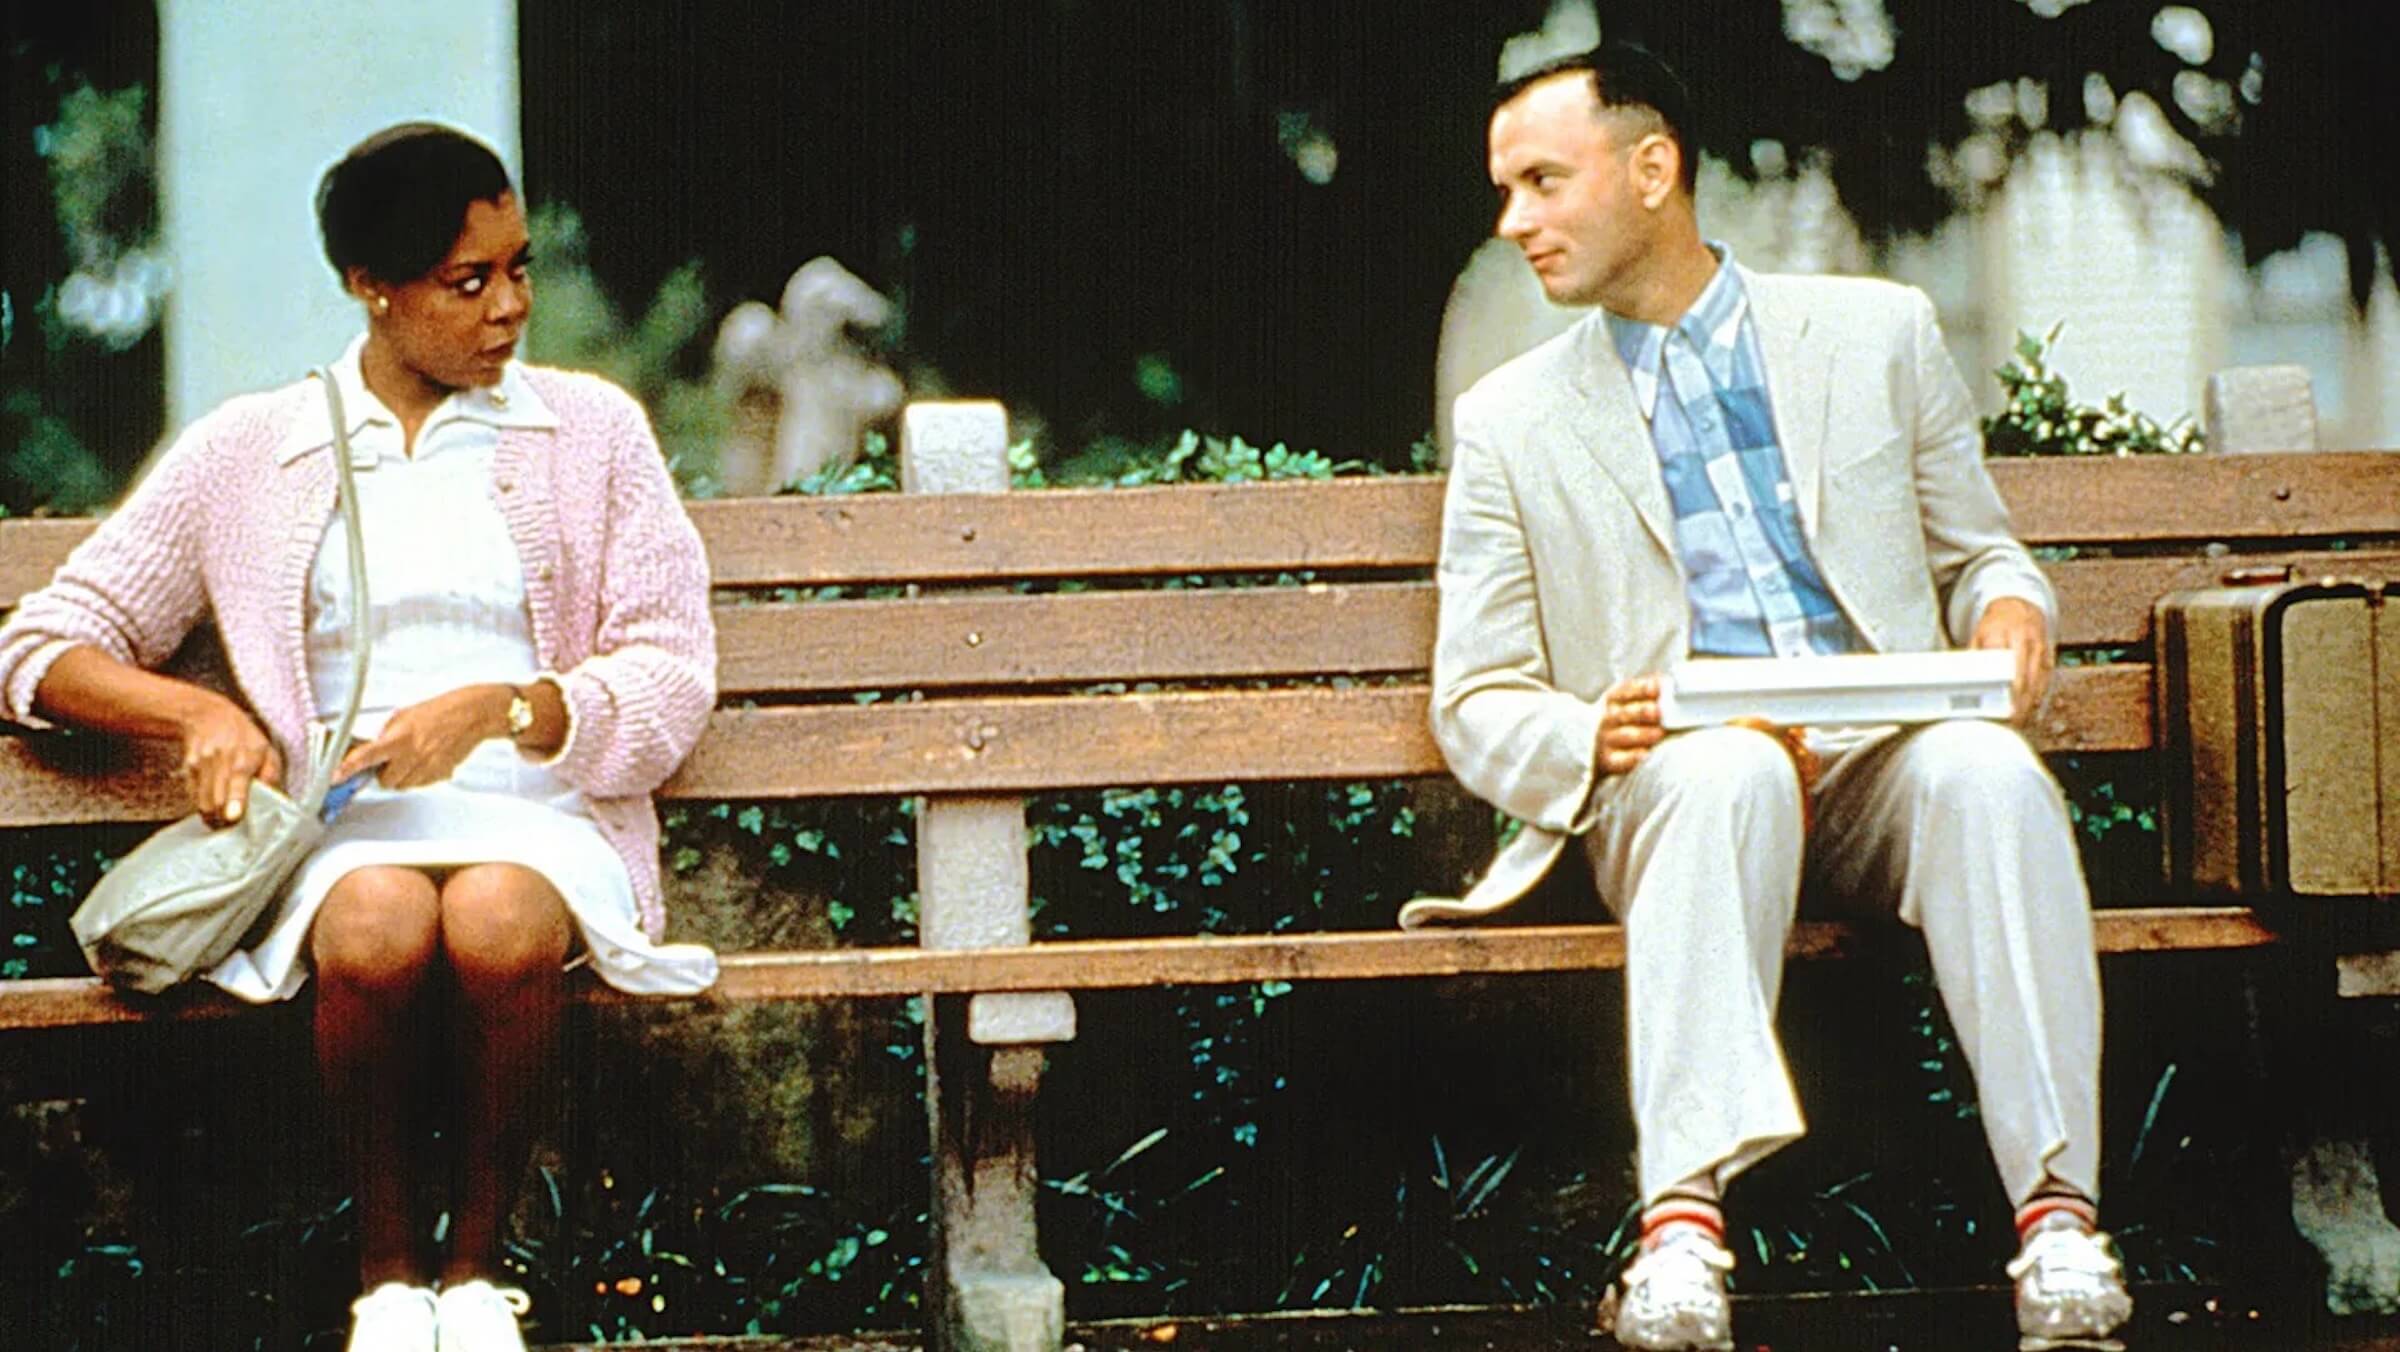 Forrest Gump (Tom Hanks) sitting on a bus bench with a box of chocolates in 'Forrest Gump,' 15 Most Quotable Movies of All Time